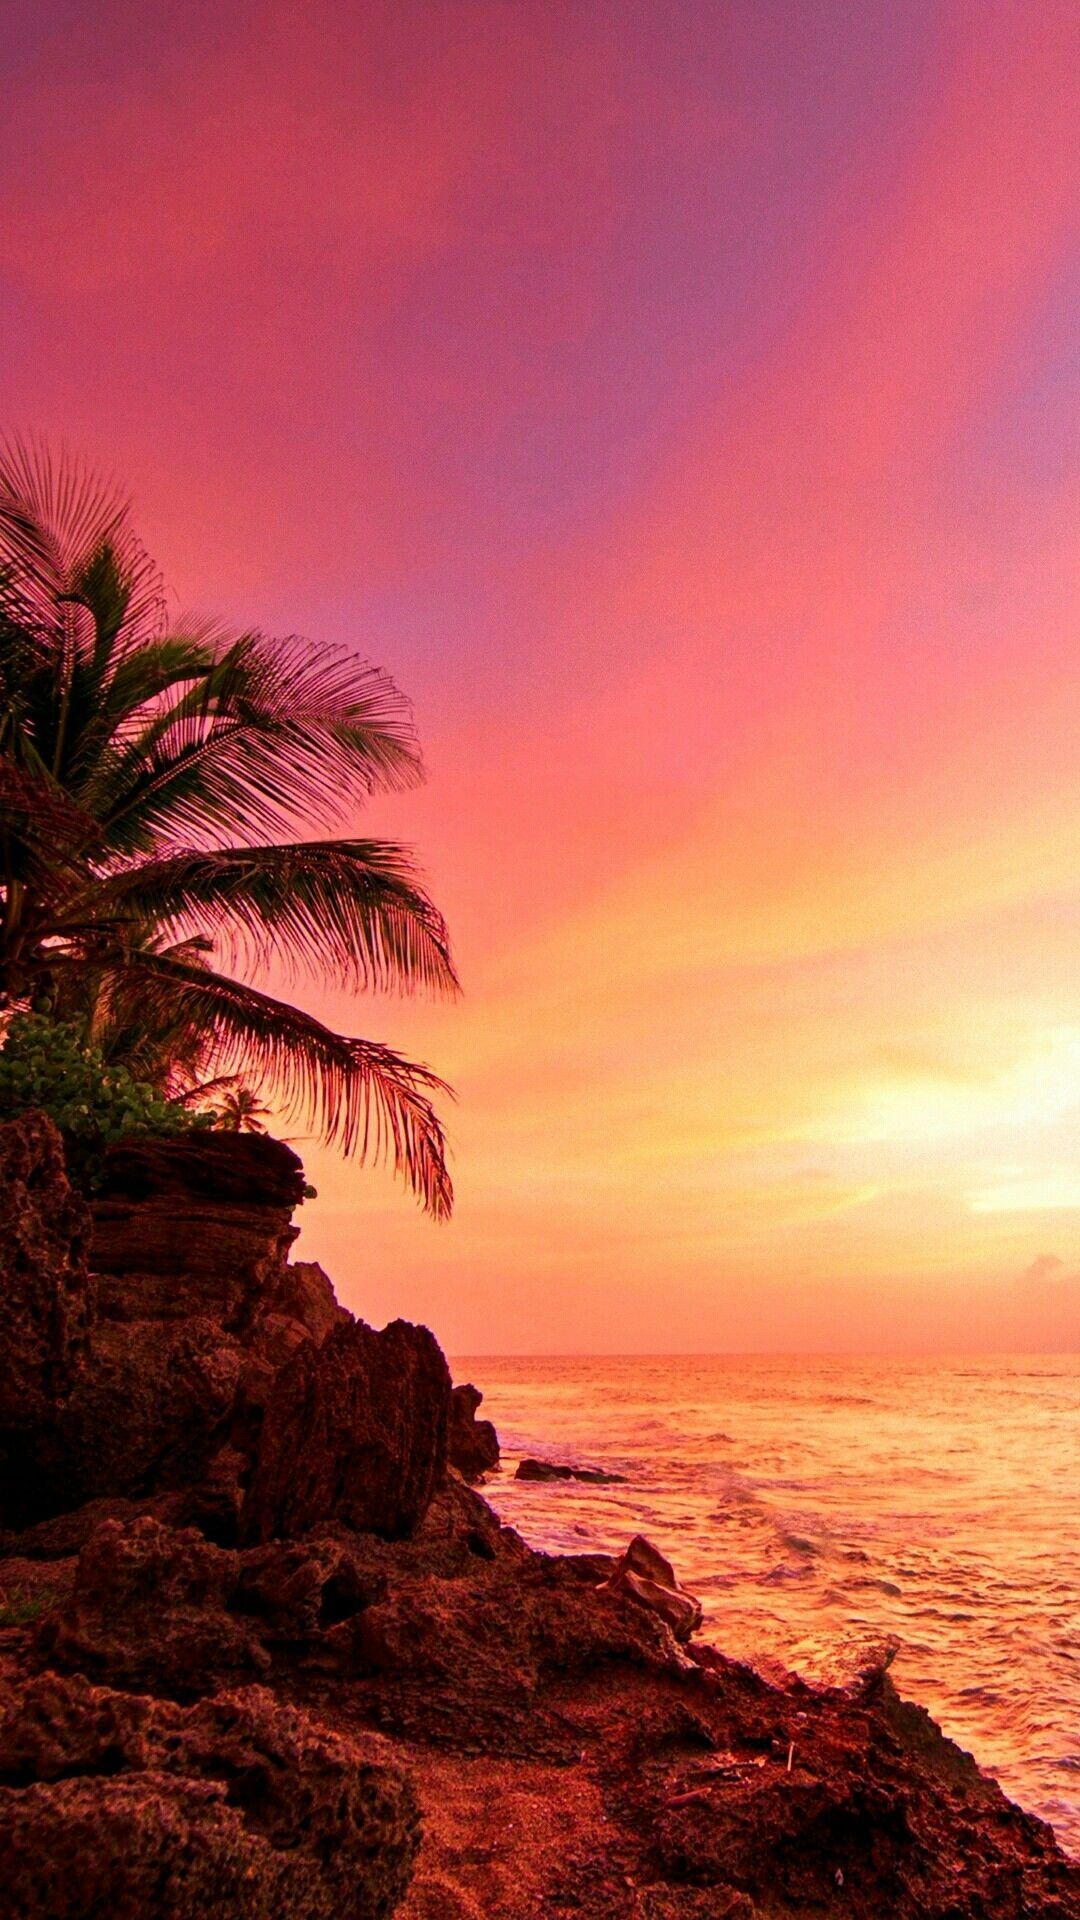 Puerto Rican iPhone wallpapers, Tropical vibes, Island life, Colorful scenes, 1080x1920 Full HD Phone